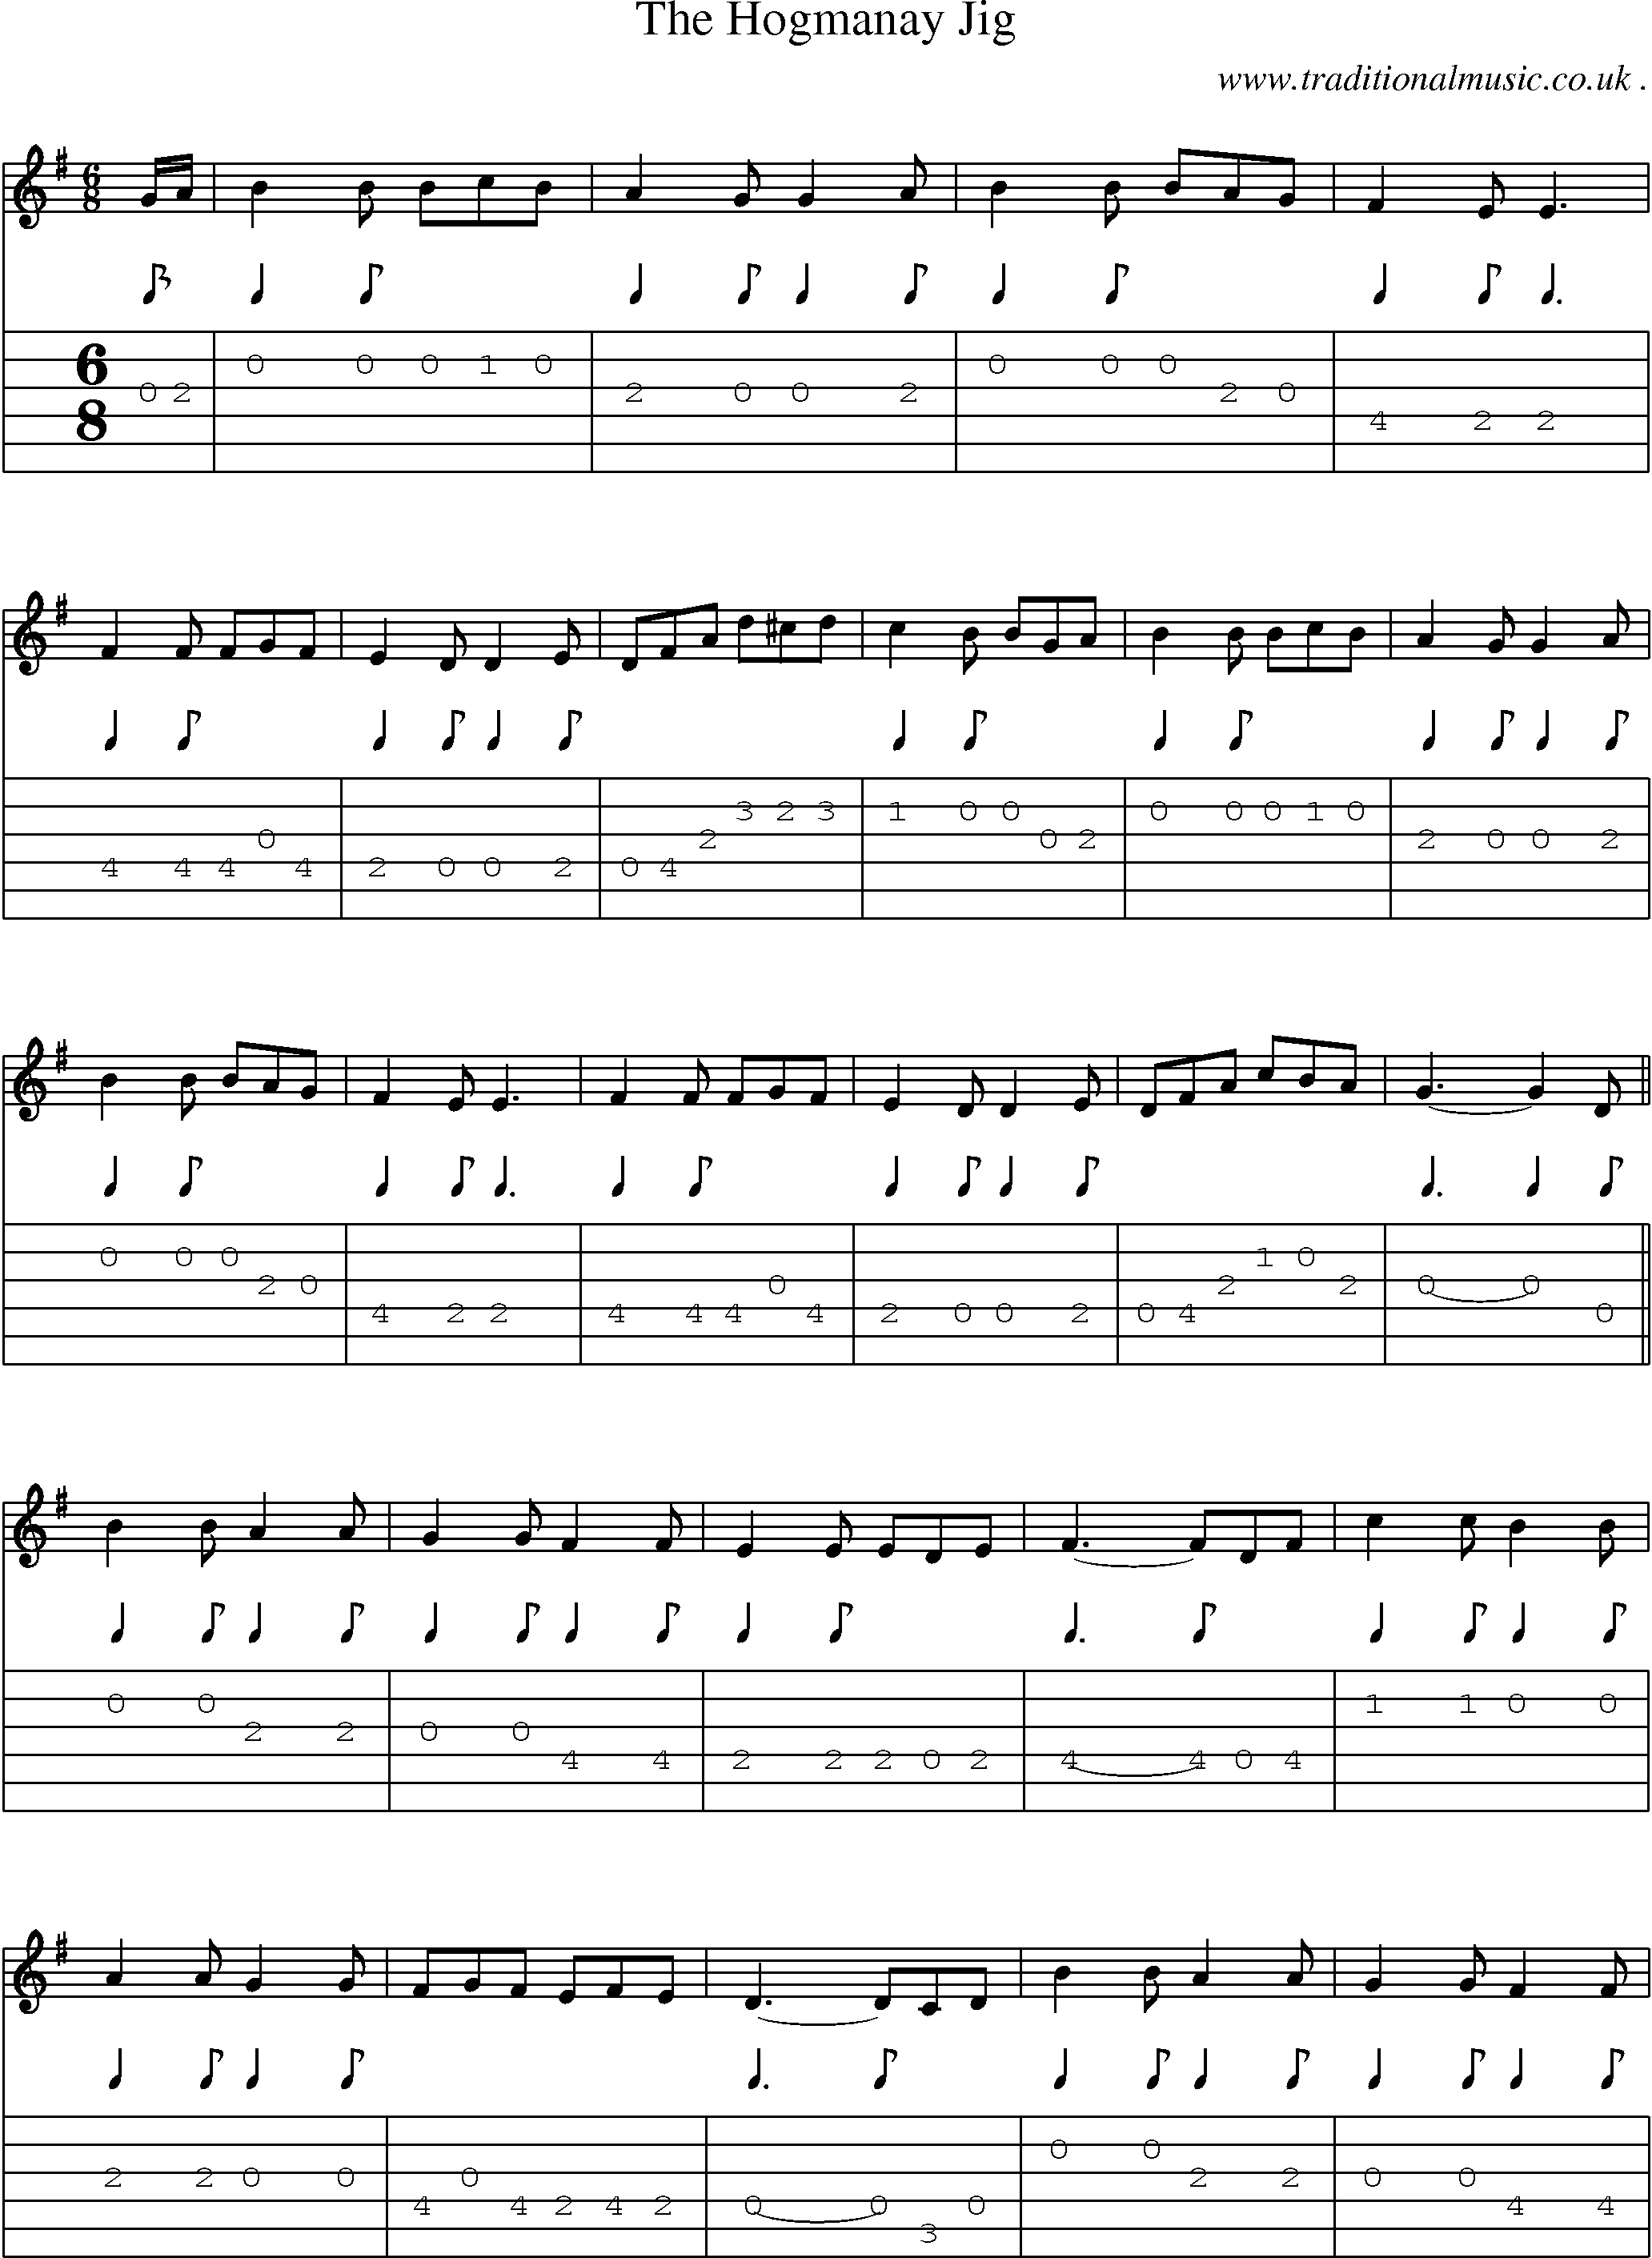 Sheet-Music and Guitar Tabs for The Hogmanay Jig